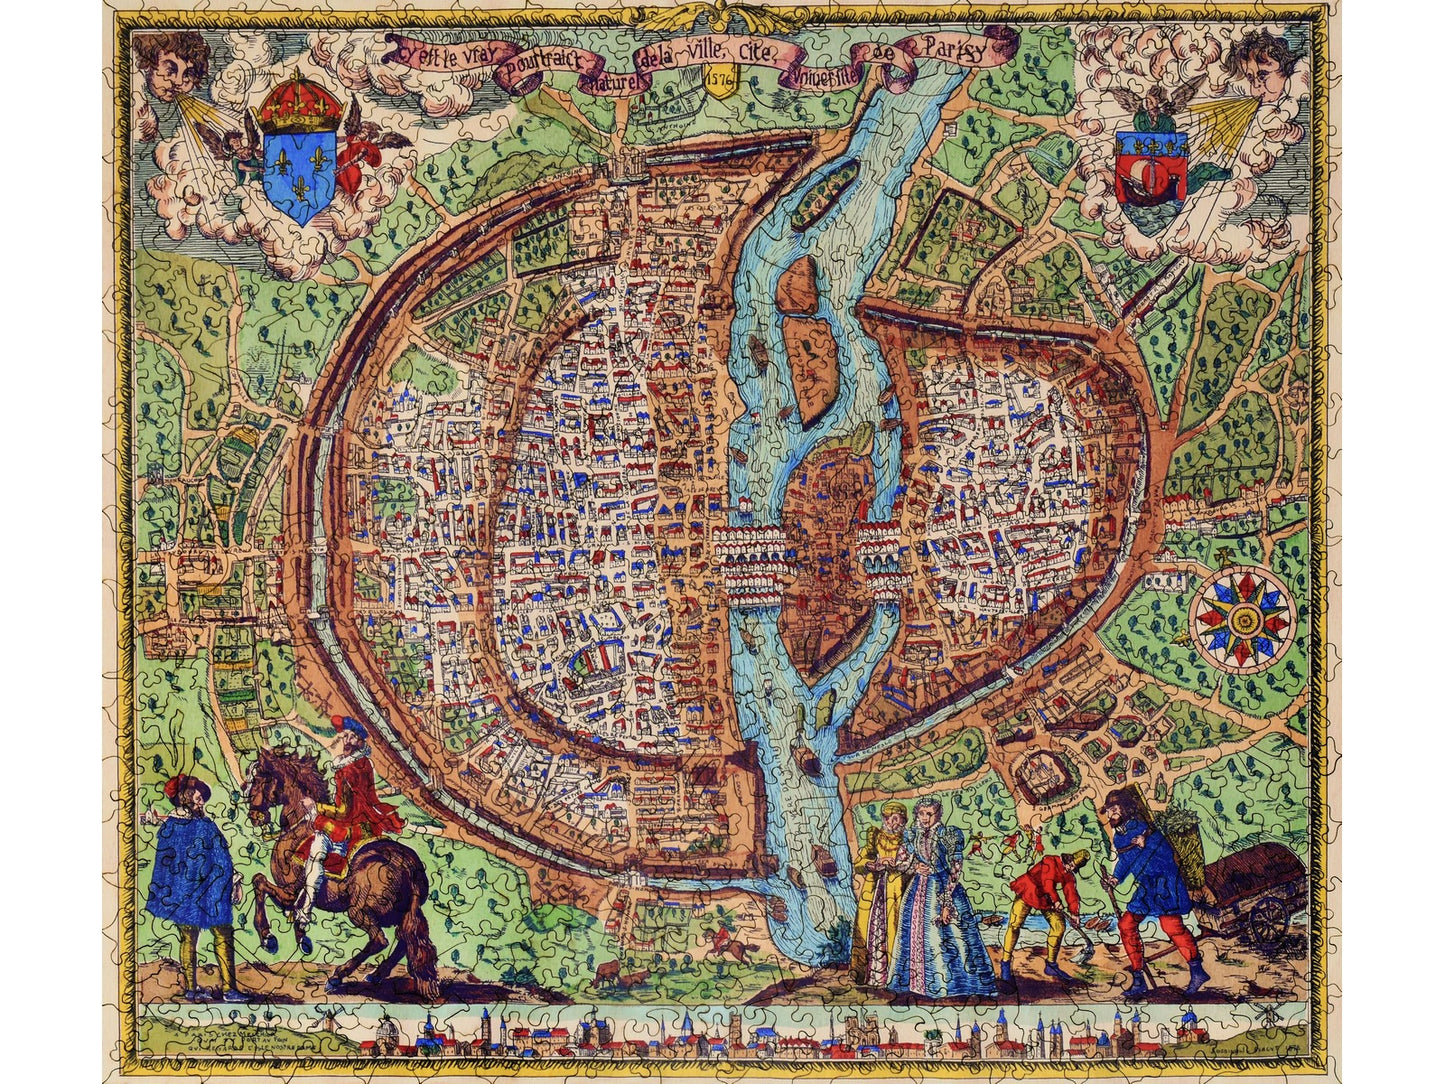 The front of the puzzle, Map of Paris, which shows an old medieval map of Paris.